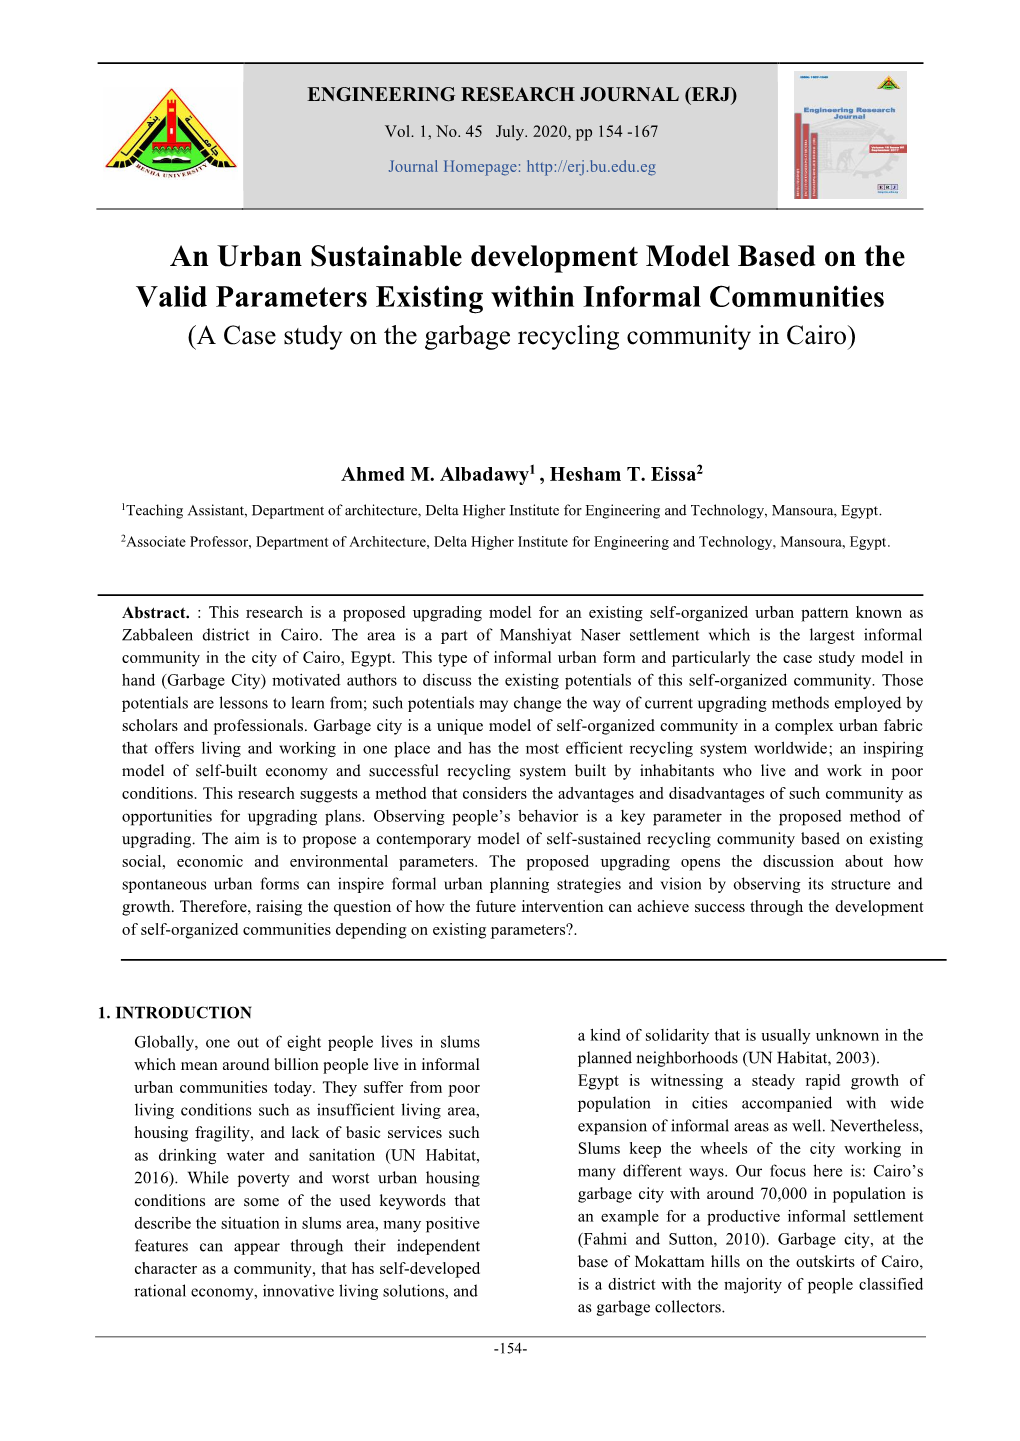 An Urban Sustainable Development Model Based on the Valid Parameters Existing Within Informal Communities (A Case Study on the Garbage Recycling Community in Cairo)